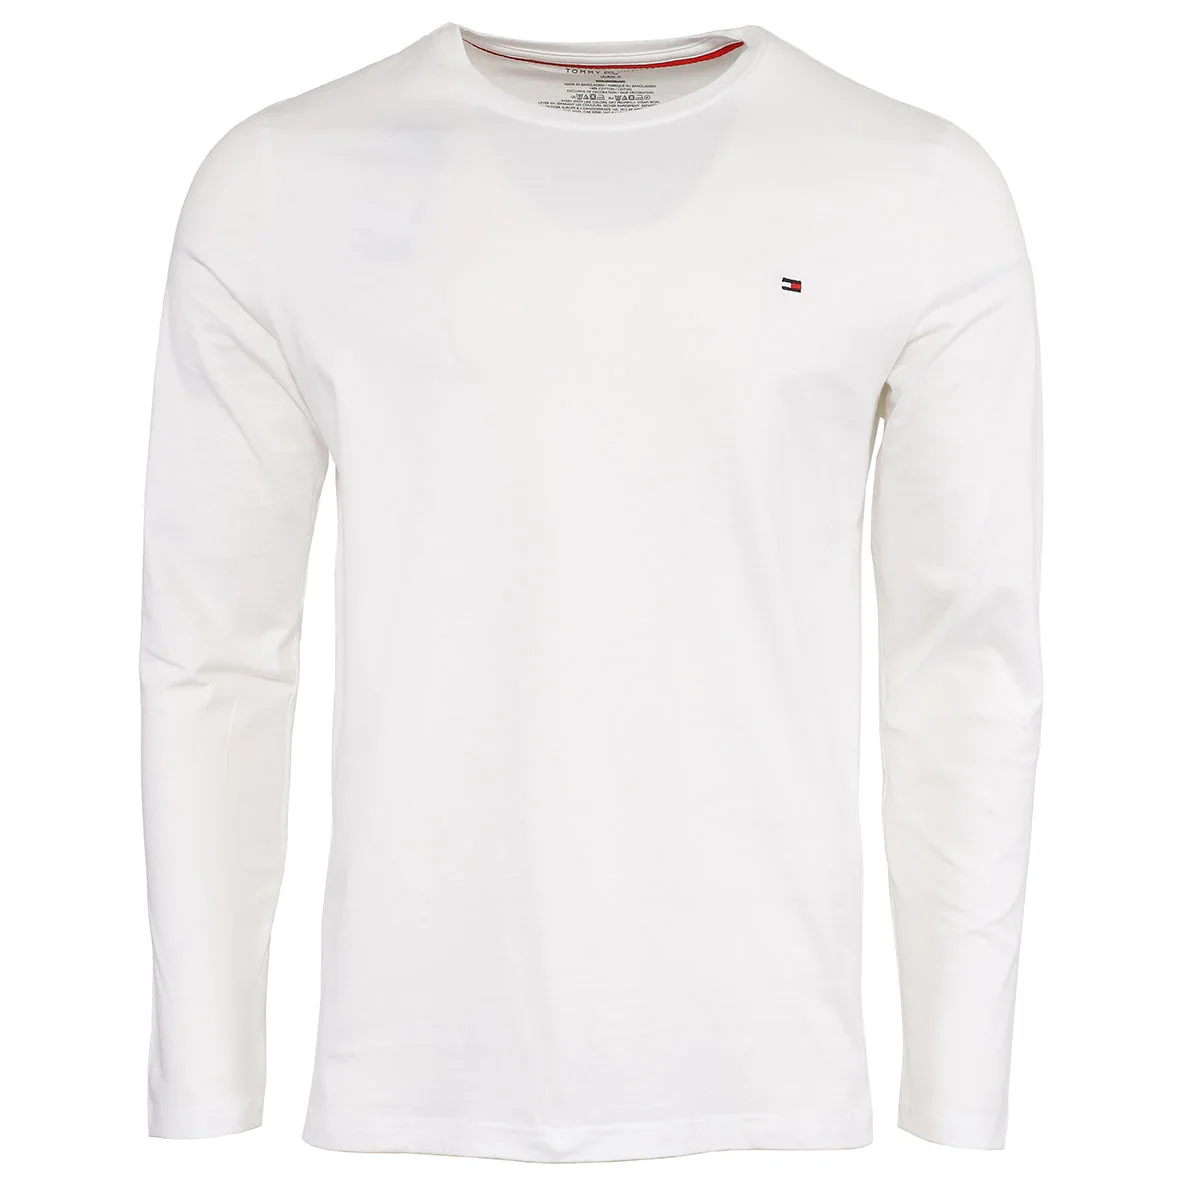 Image of Tommy Hilfiger Men's Core Flag Long Sleeve Crew